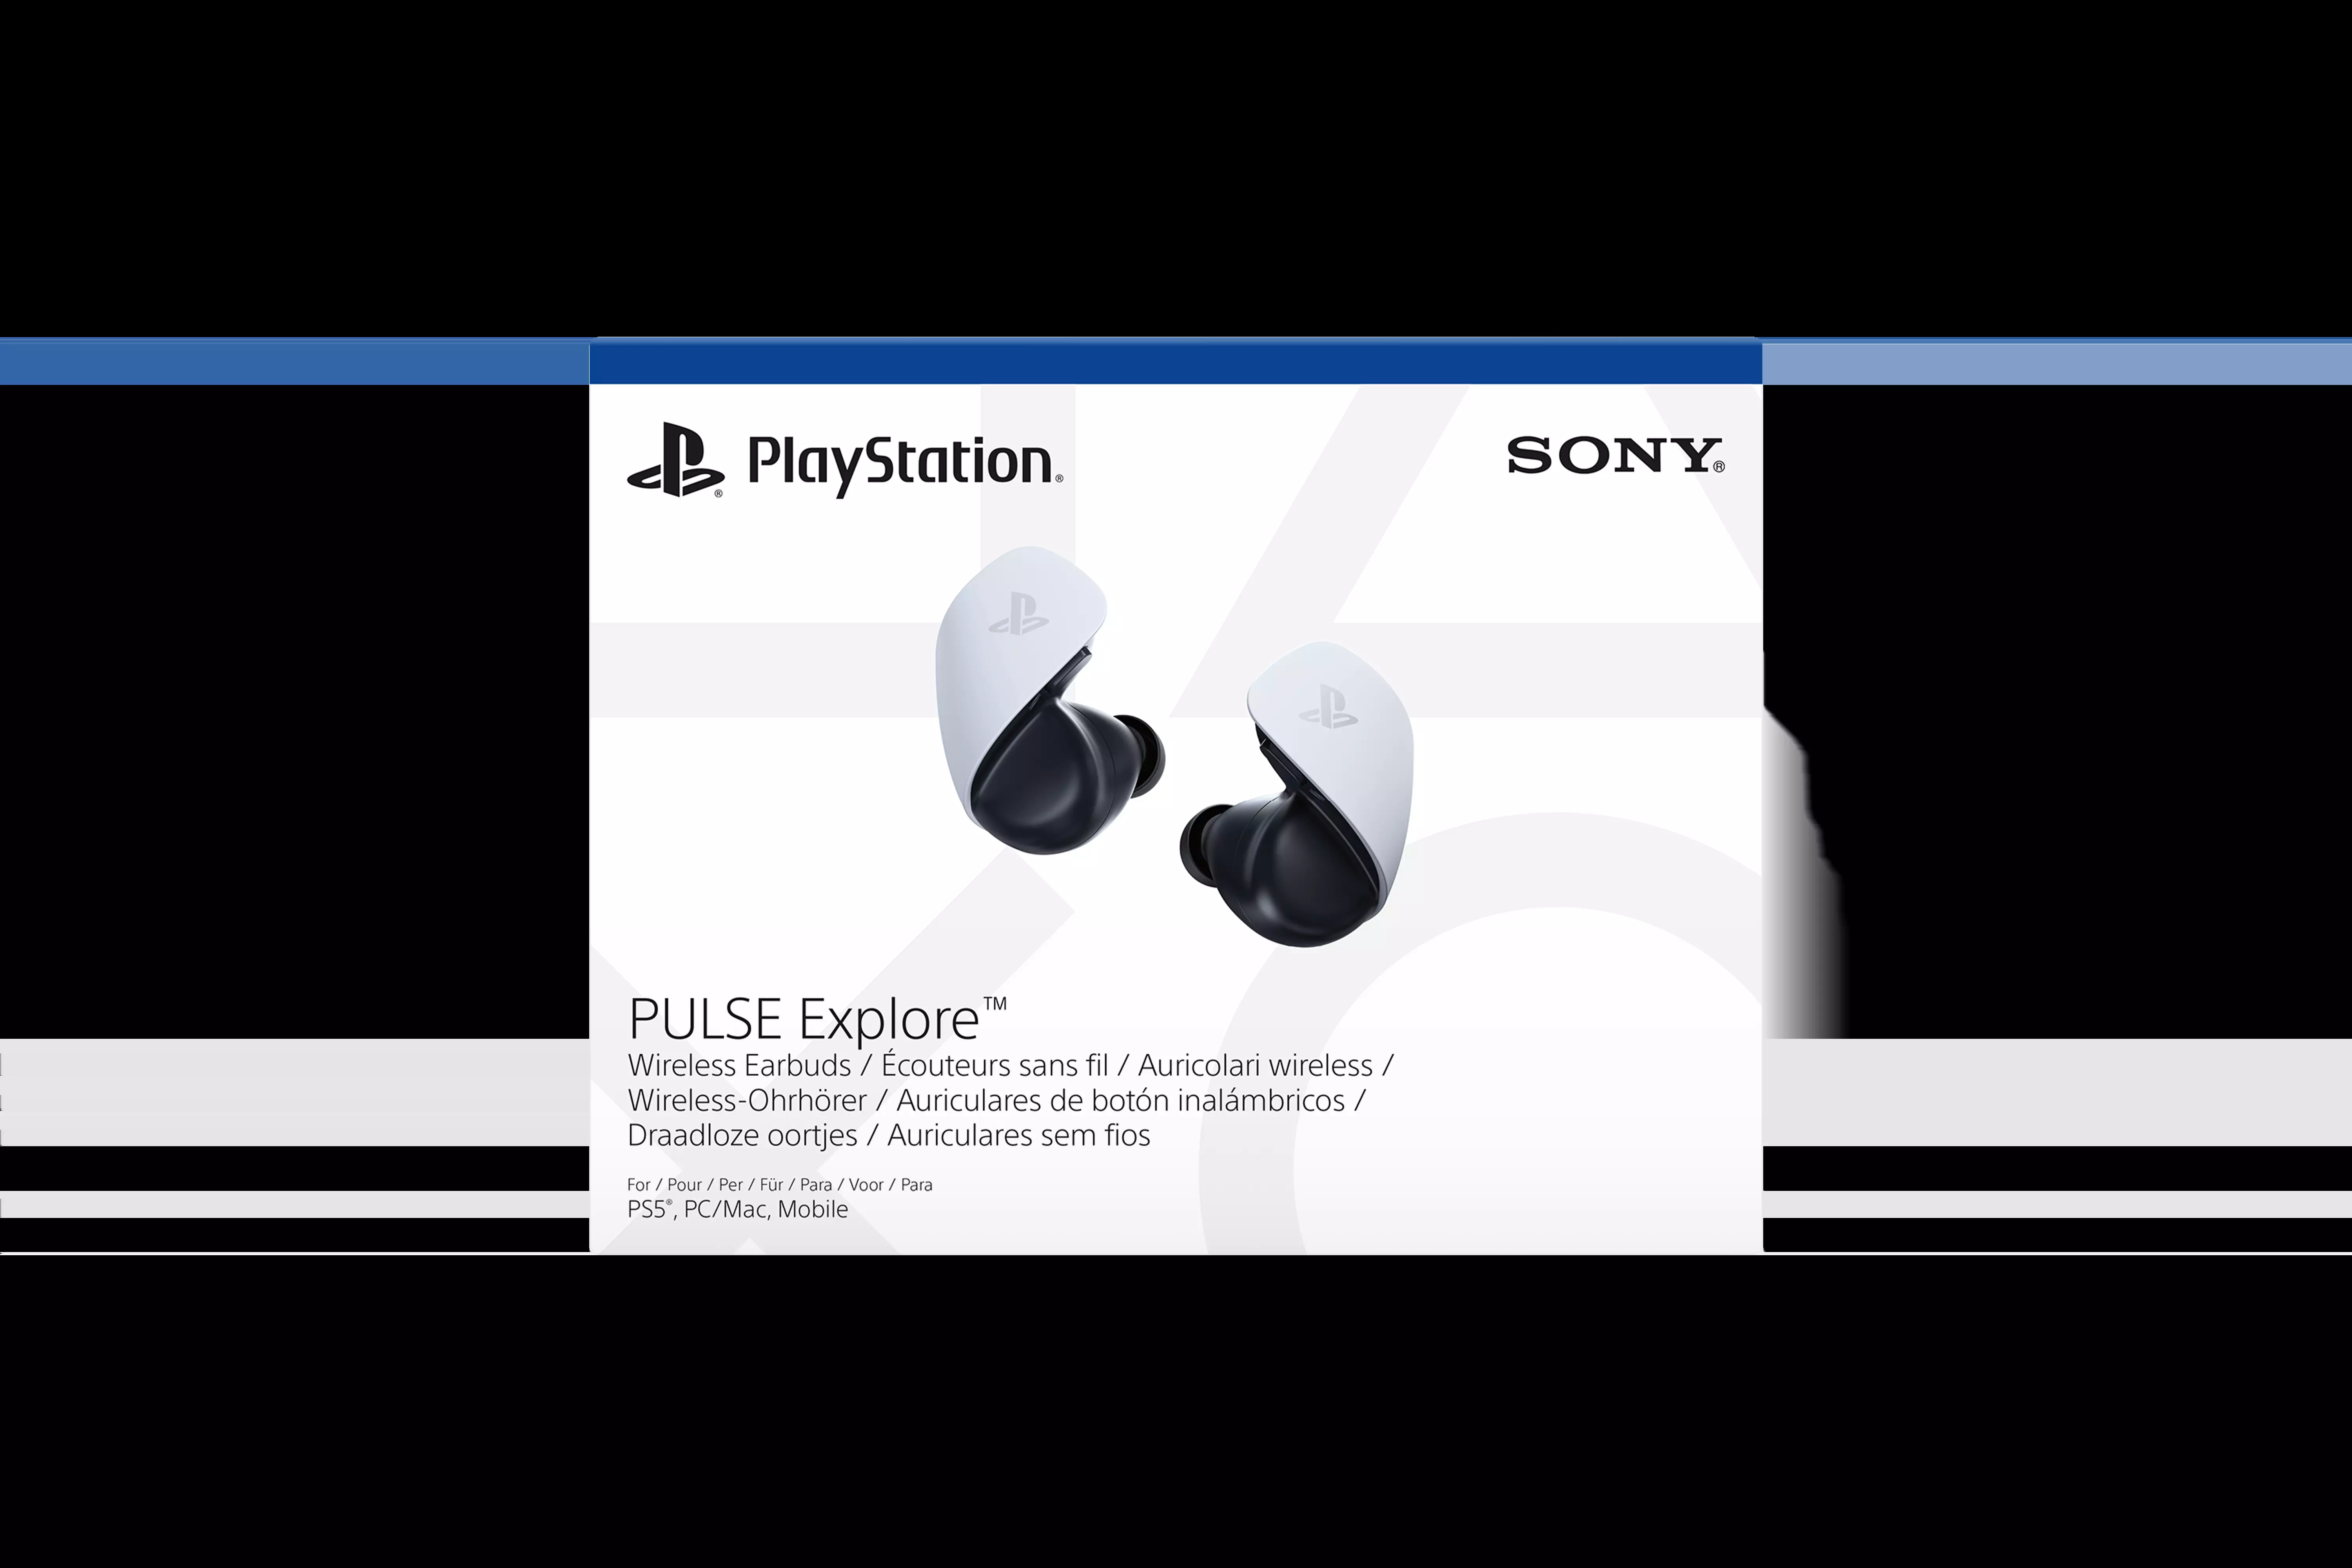 Sony Playstation Pulse Explore- Wireless Earbuds